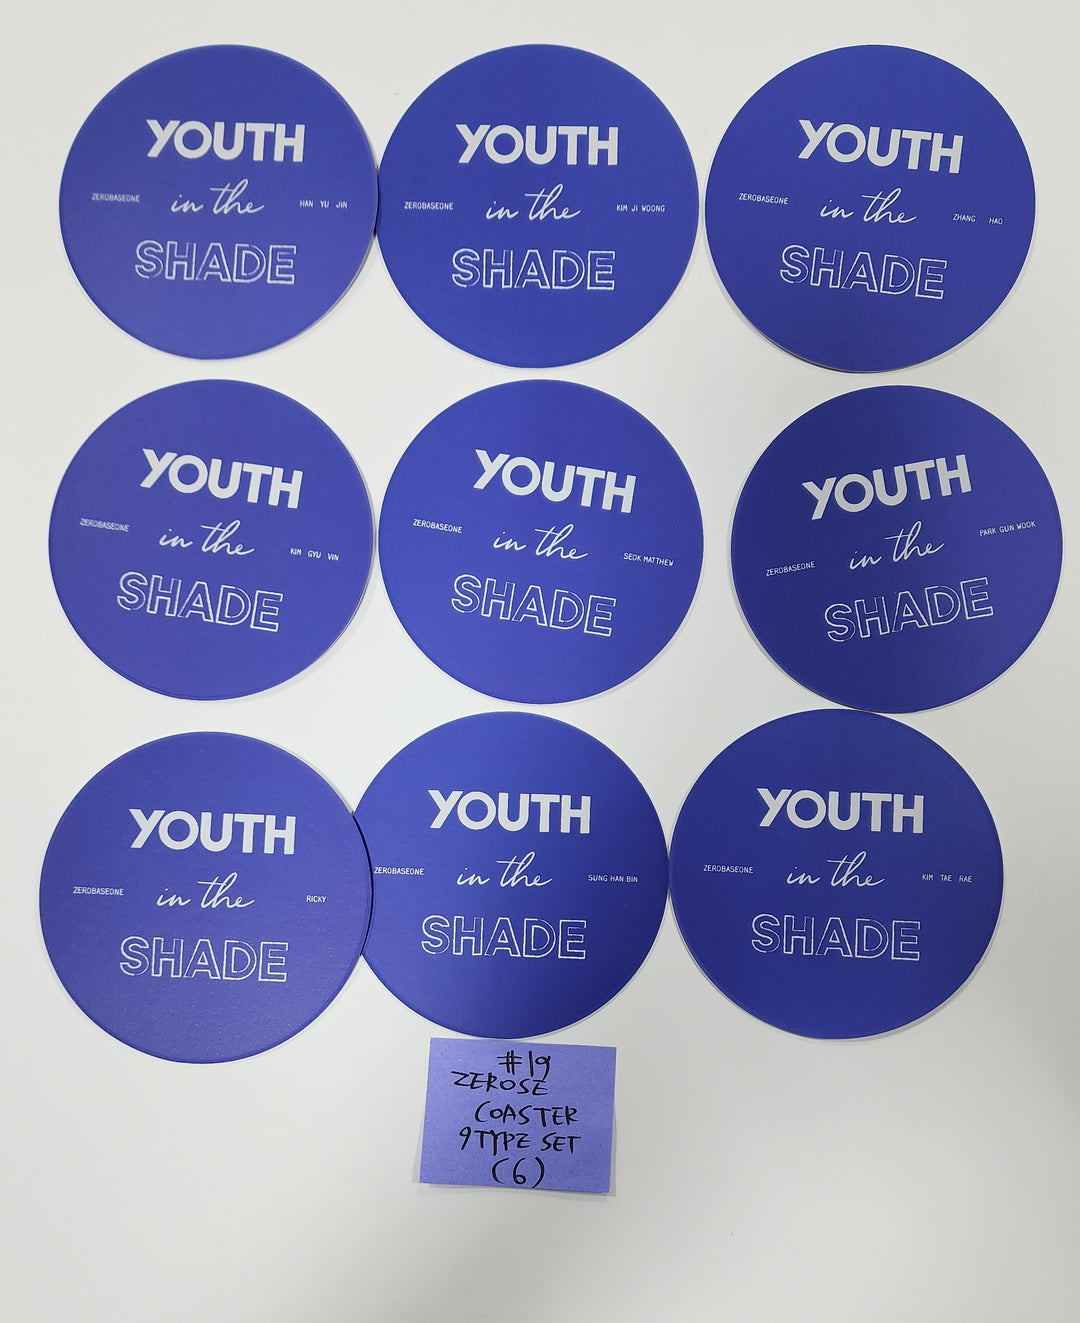 ZEROBASEONE (ZB1) "YOUTH IN THE SHADE" - Official Photo Frame, Layer Card Set, Zerose Coaster